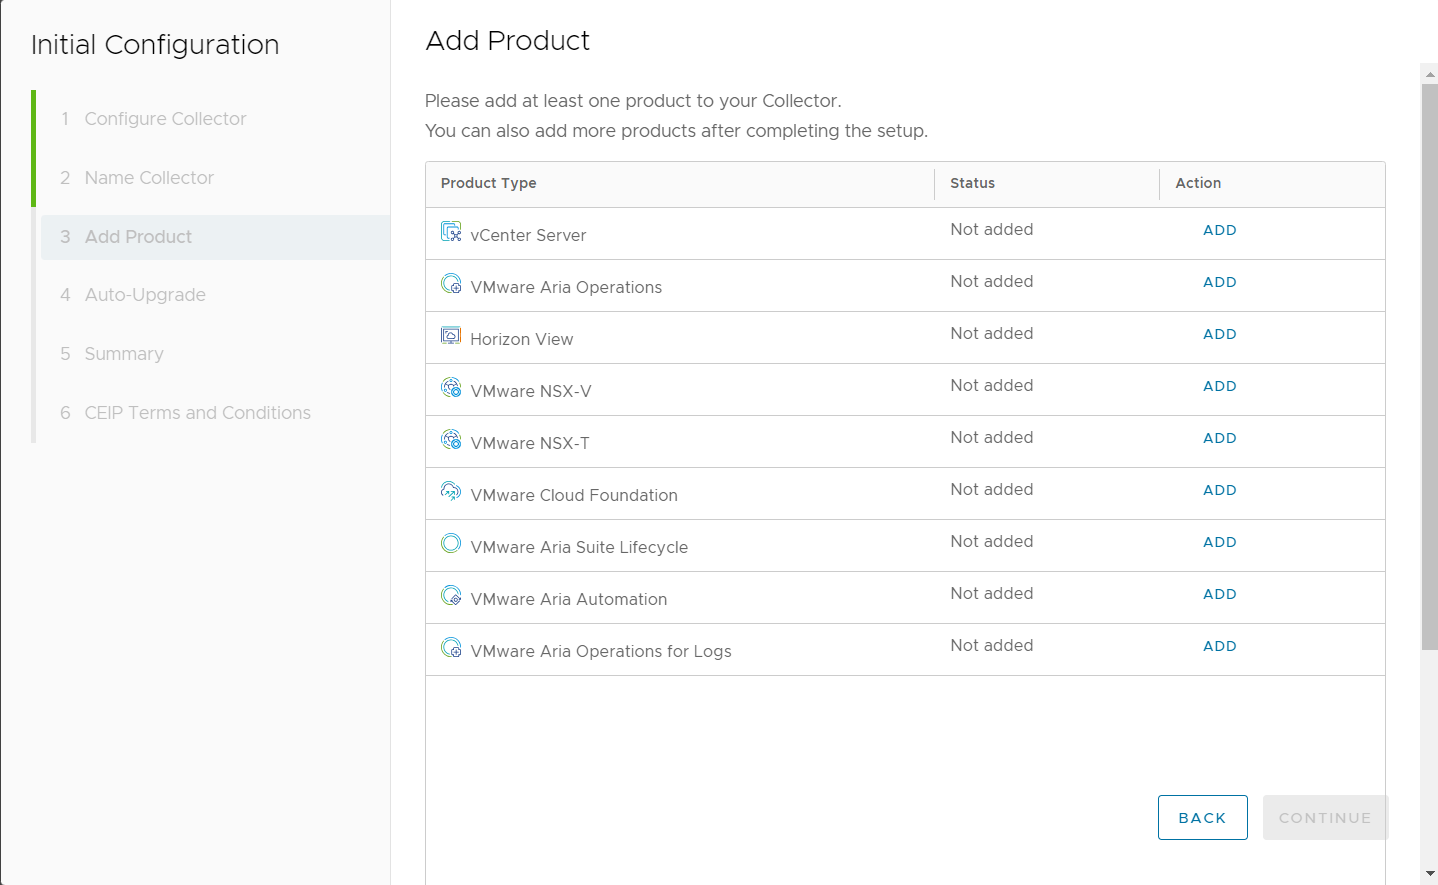 Add Product page is displayed. Here, a list of all the Product Type with Status and Action column is provided. Each product typ has a ADD next to it. Back and Continue buttons are provided at the bottom.